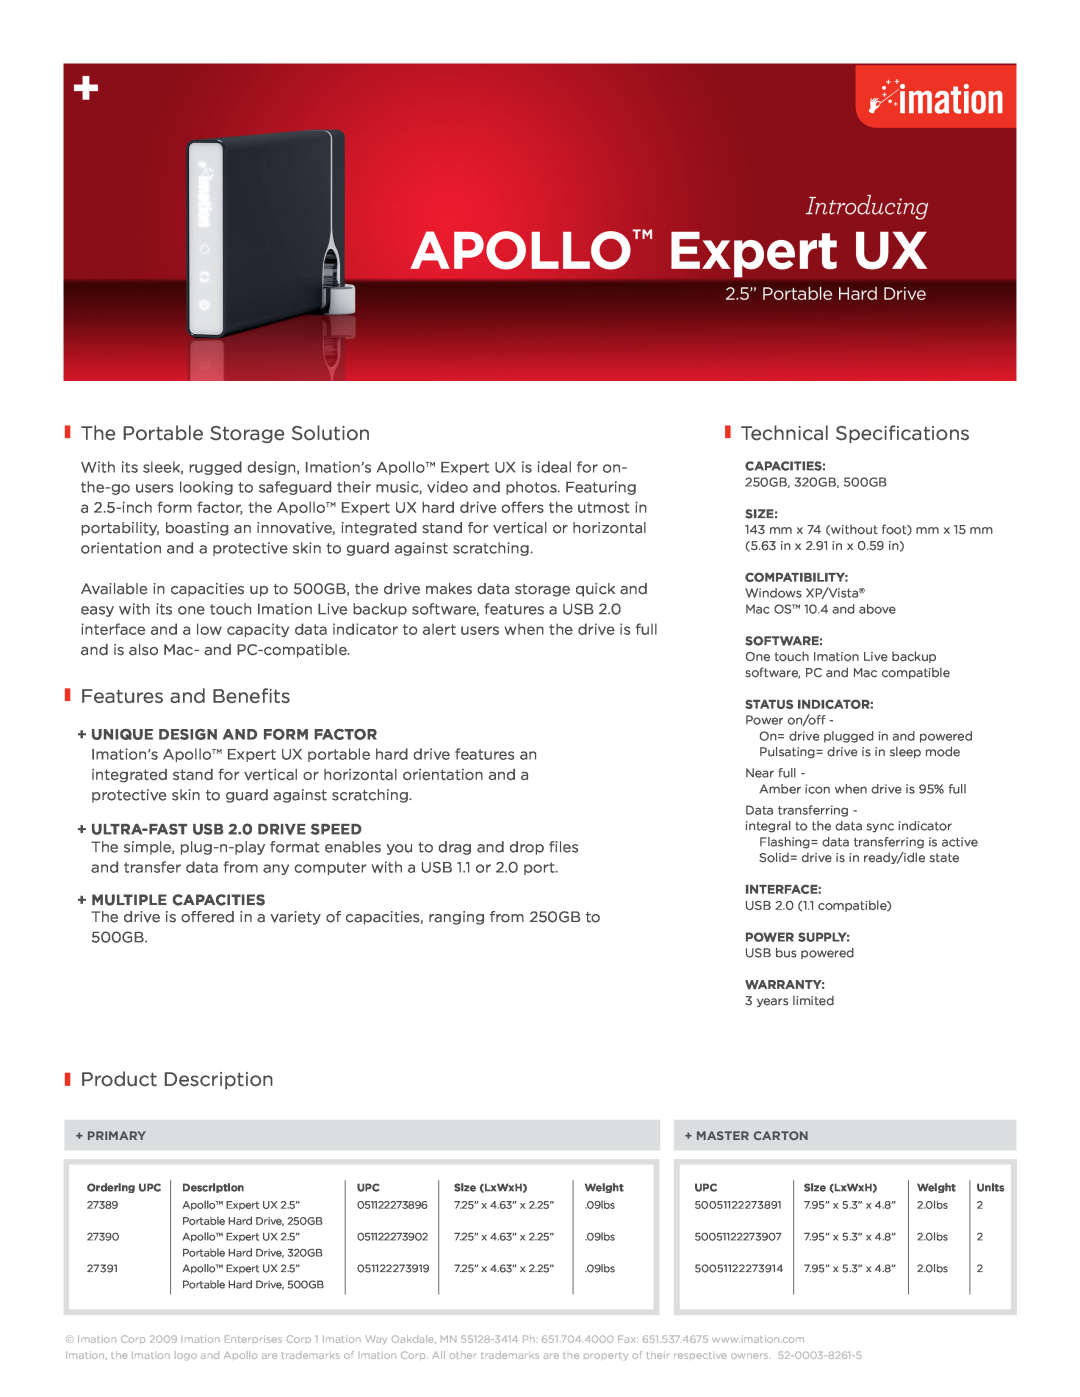 Imation manual apollo Expert UX, Introducing, The Portable Storage Solution, Technical Specifications 